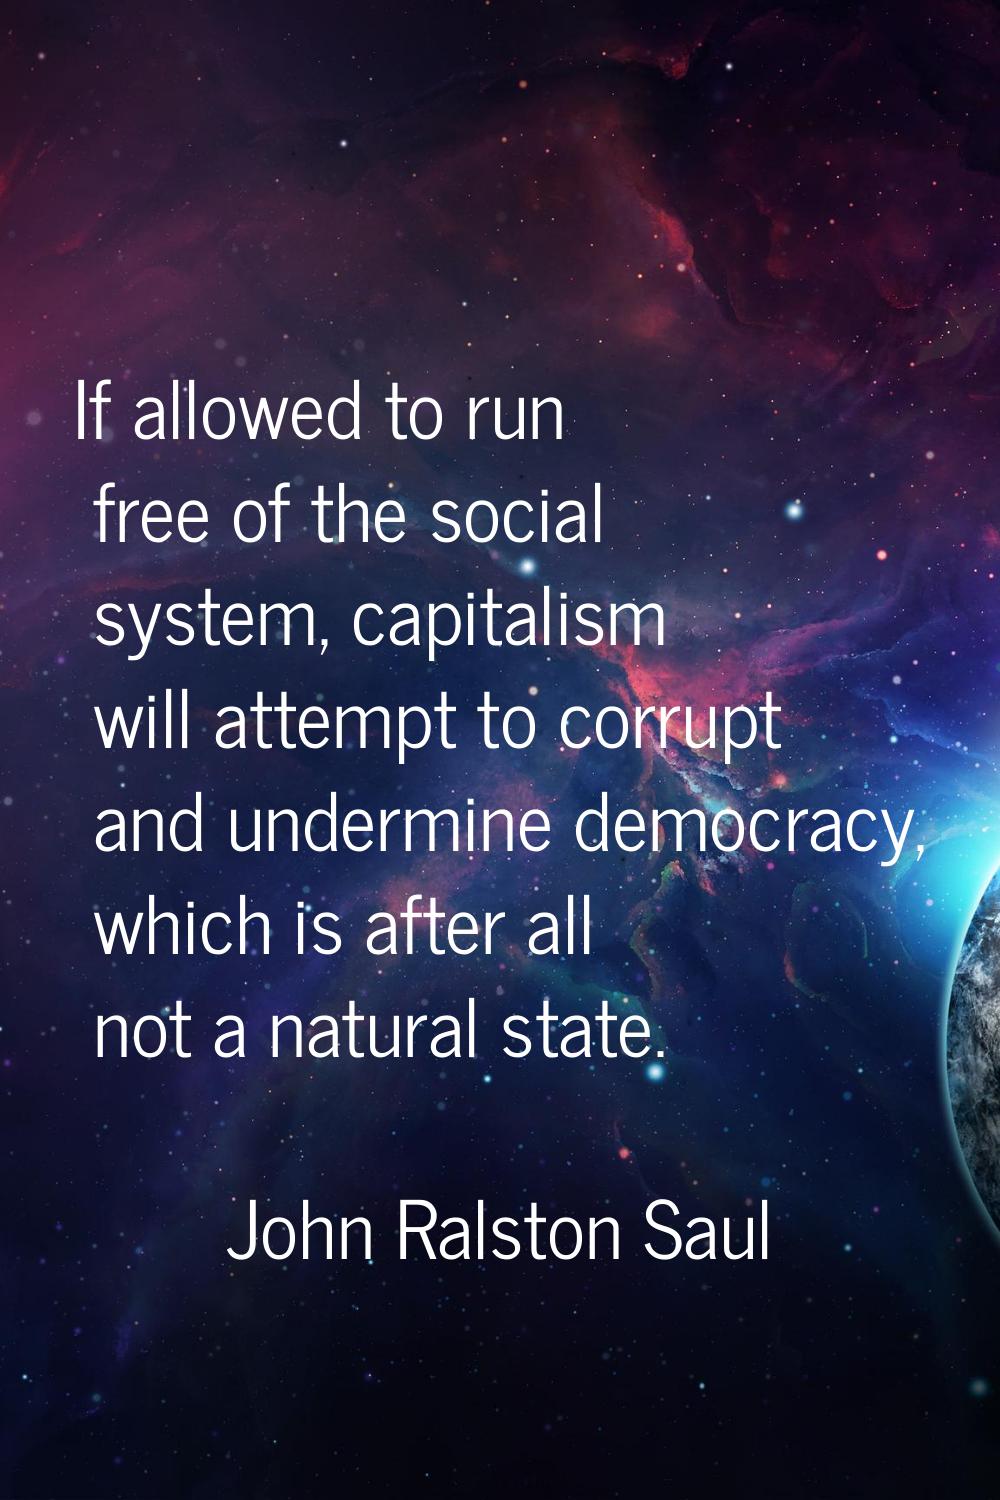 If allowed to run free of the social system, capitalism will attempt to corrupt and undermine democ